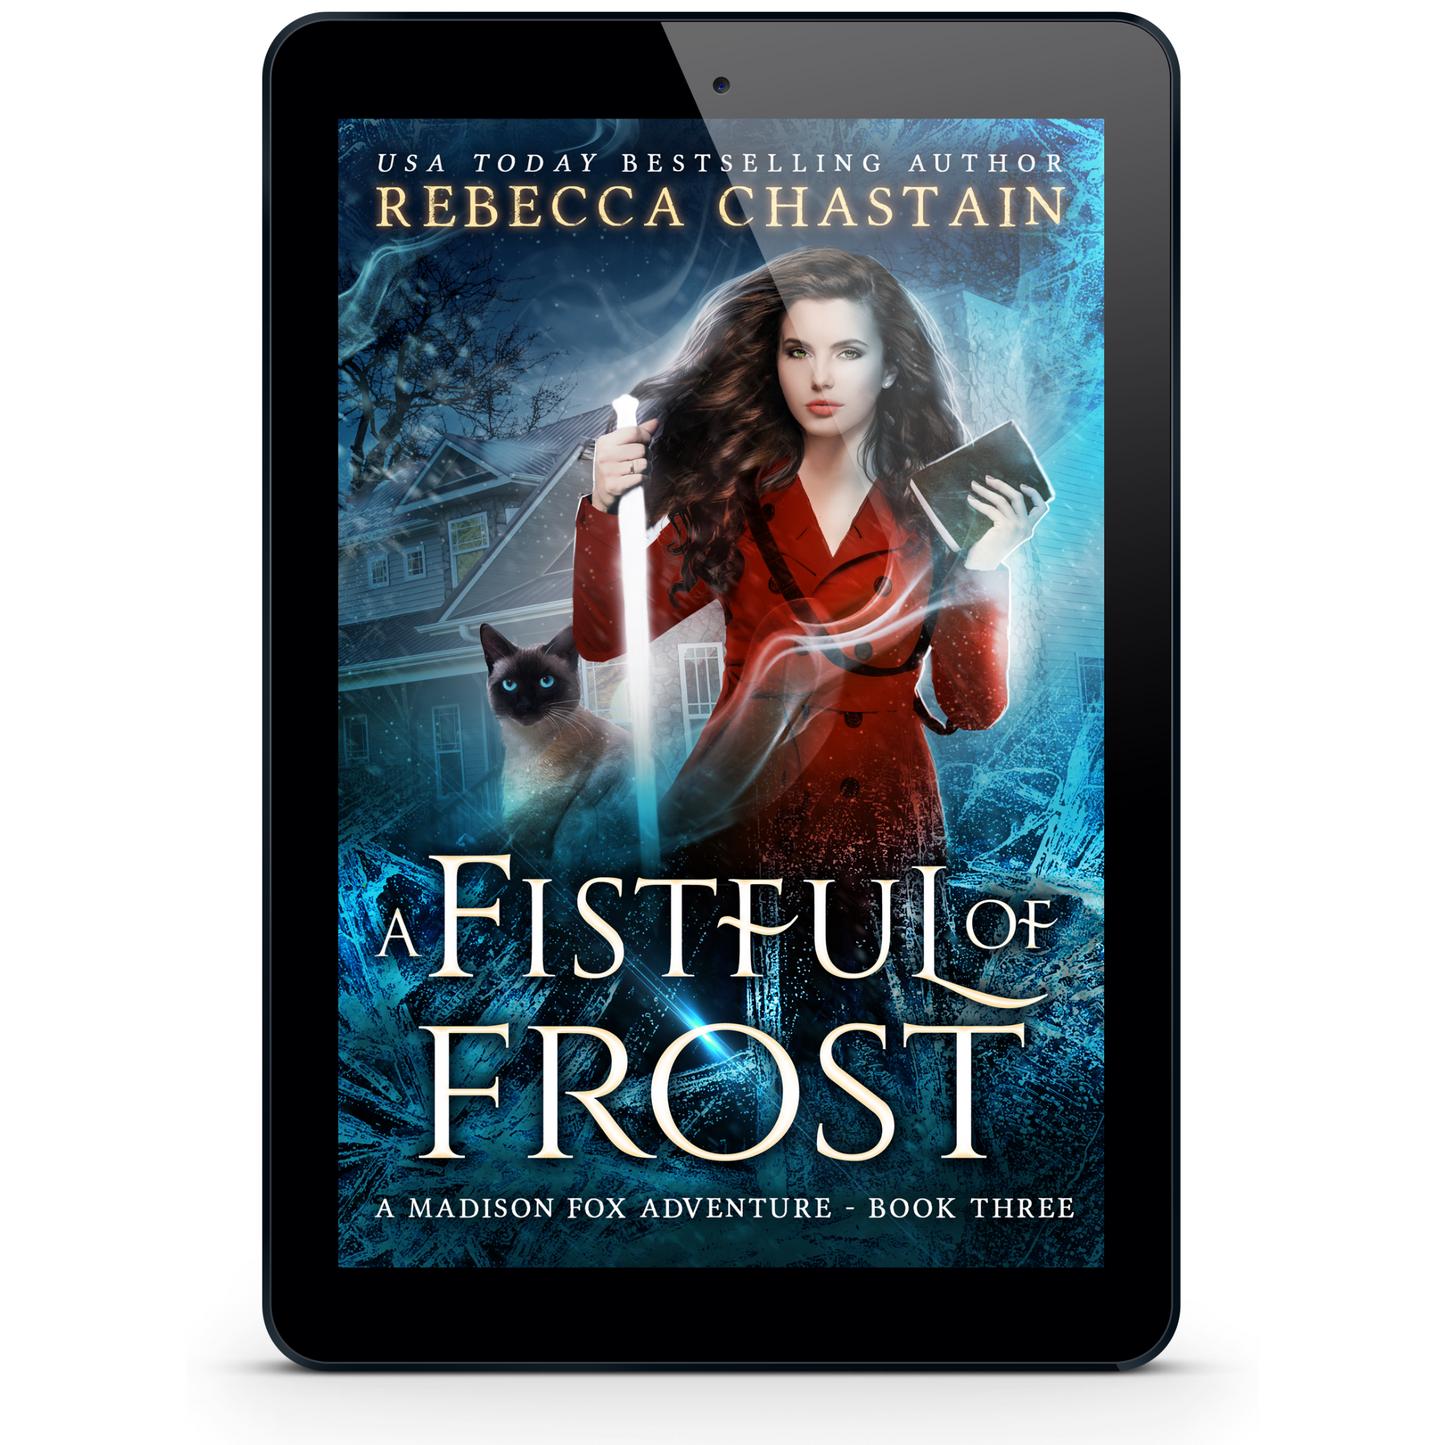 A Fistful of Frost